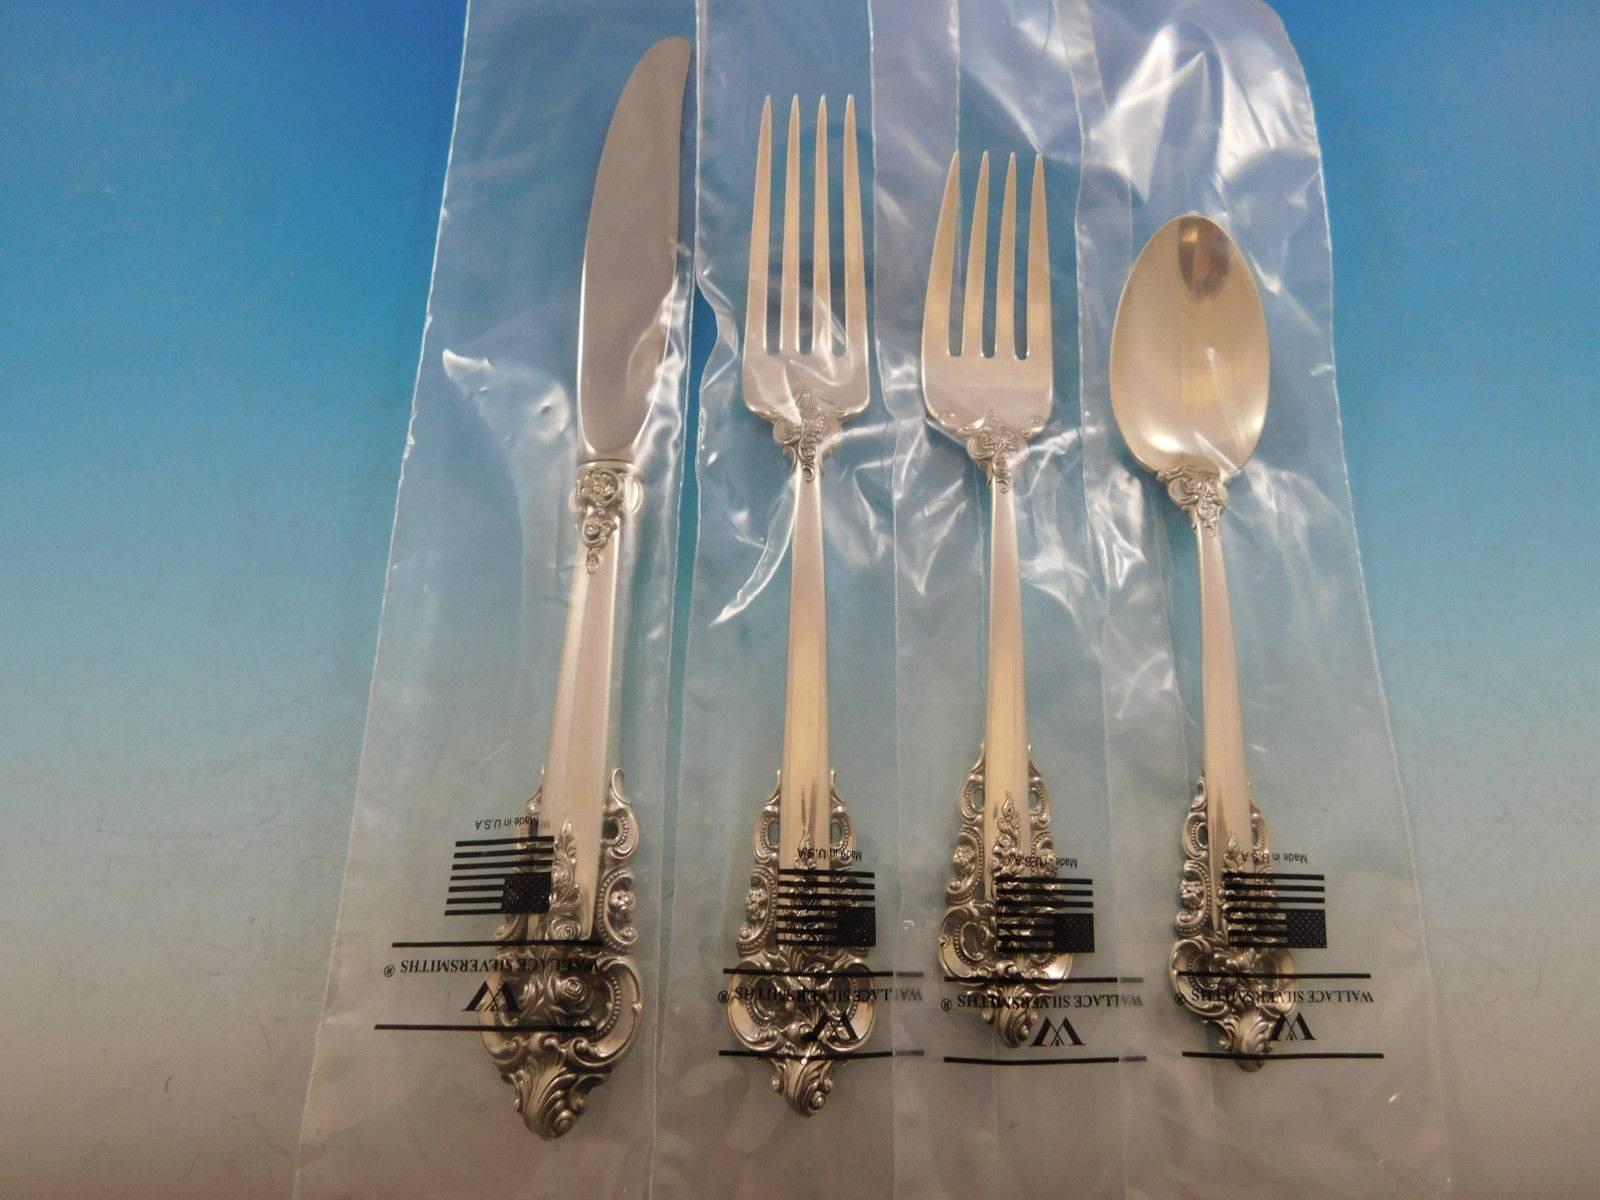 Grande Baroque by Wallace sterling silver flatware set of 50 pieces. This set is includes:

Eight knives, 8 7/8